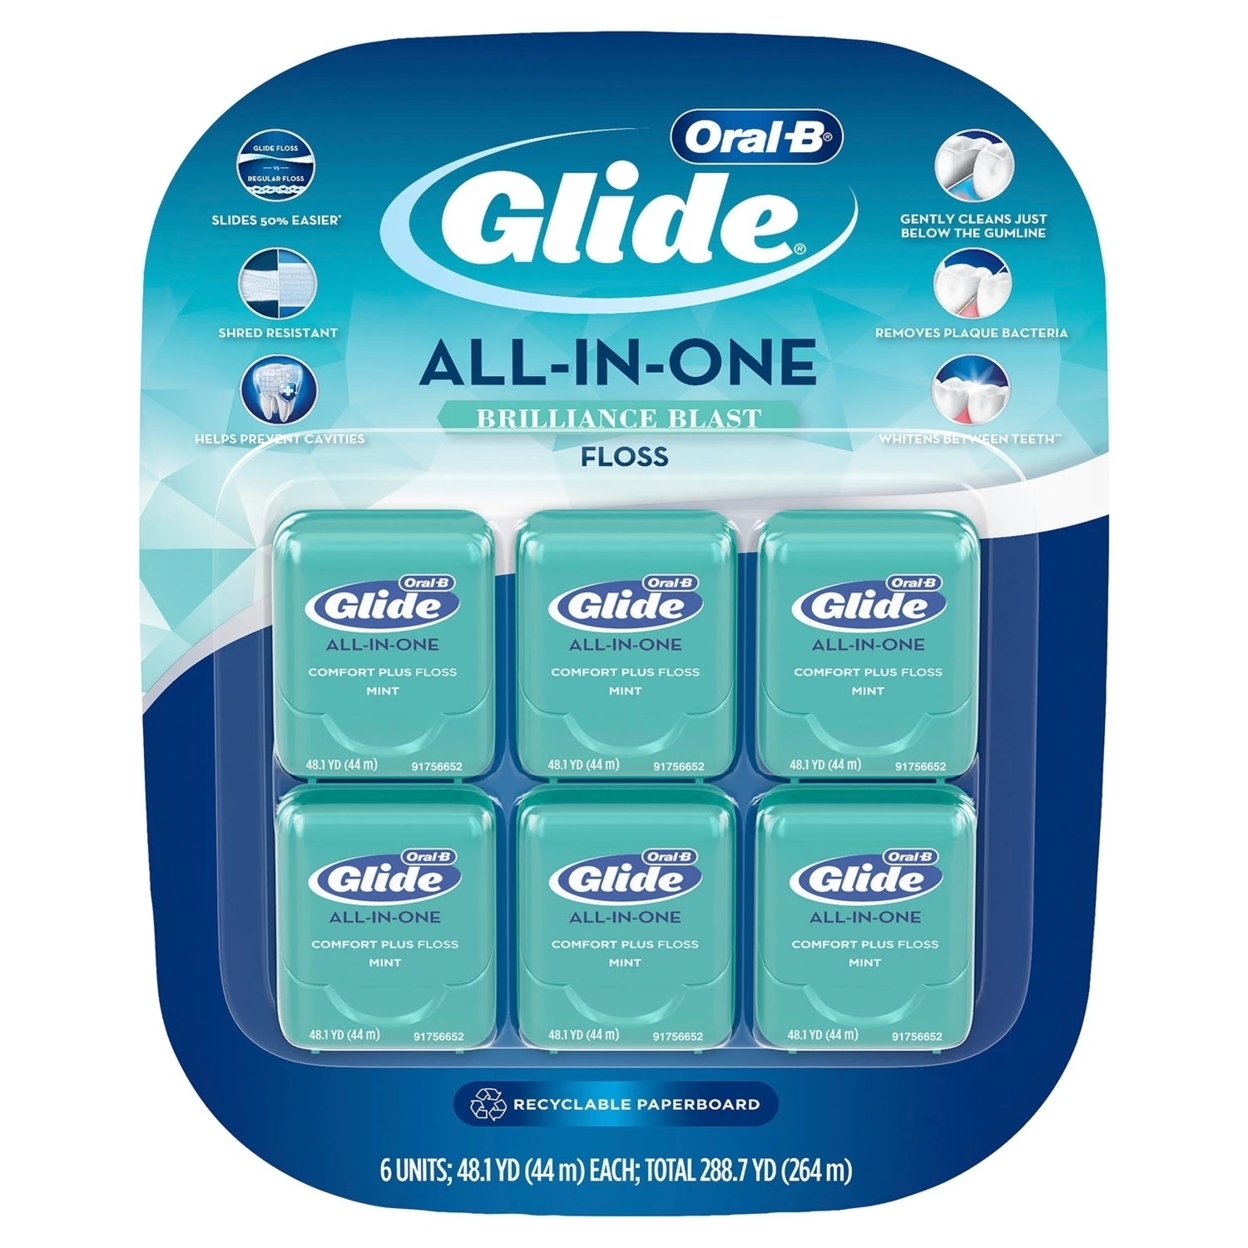 Oral-B Glide All-in-One Dental Floss, Brilliance Blast, 44 M (Pack Of 6)